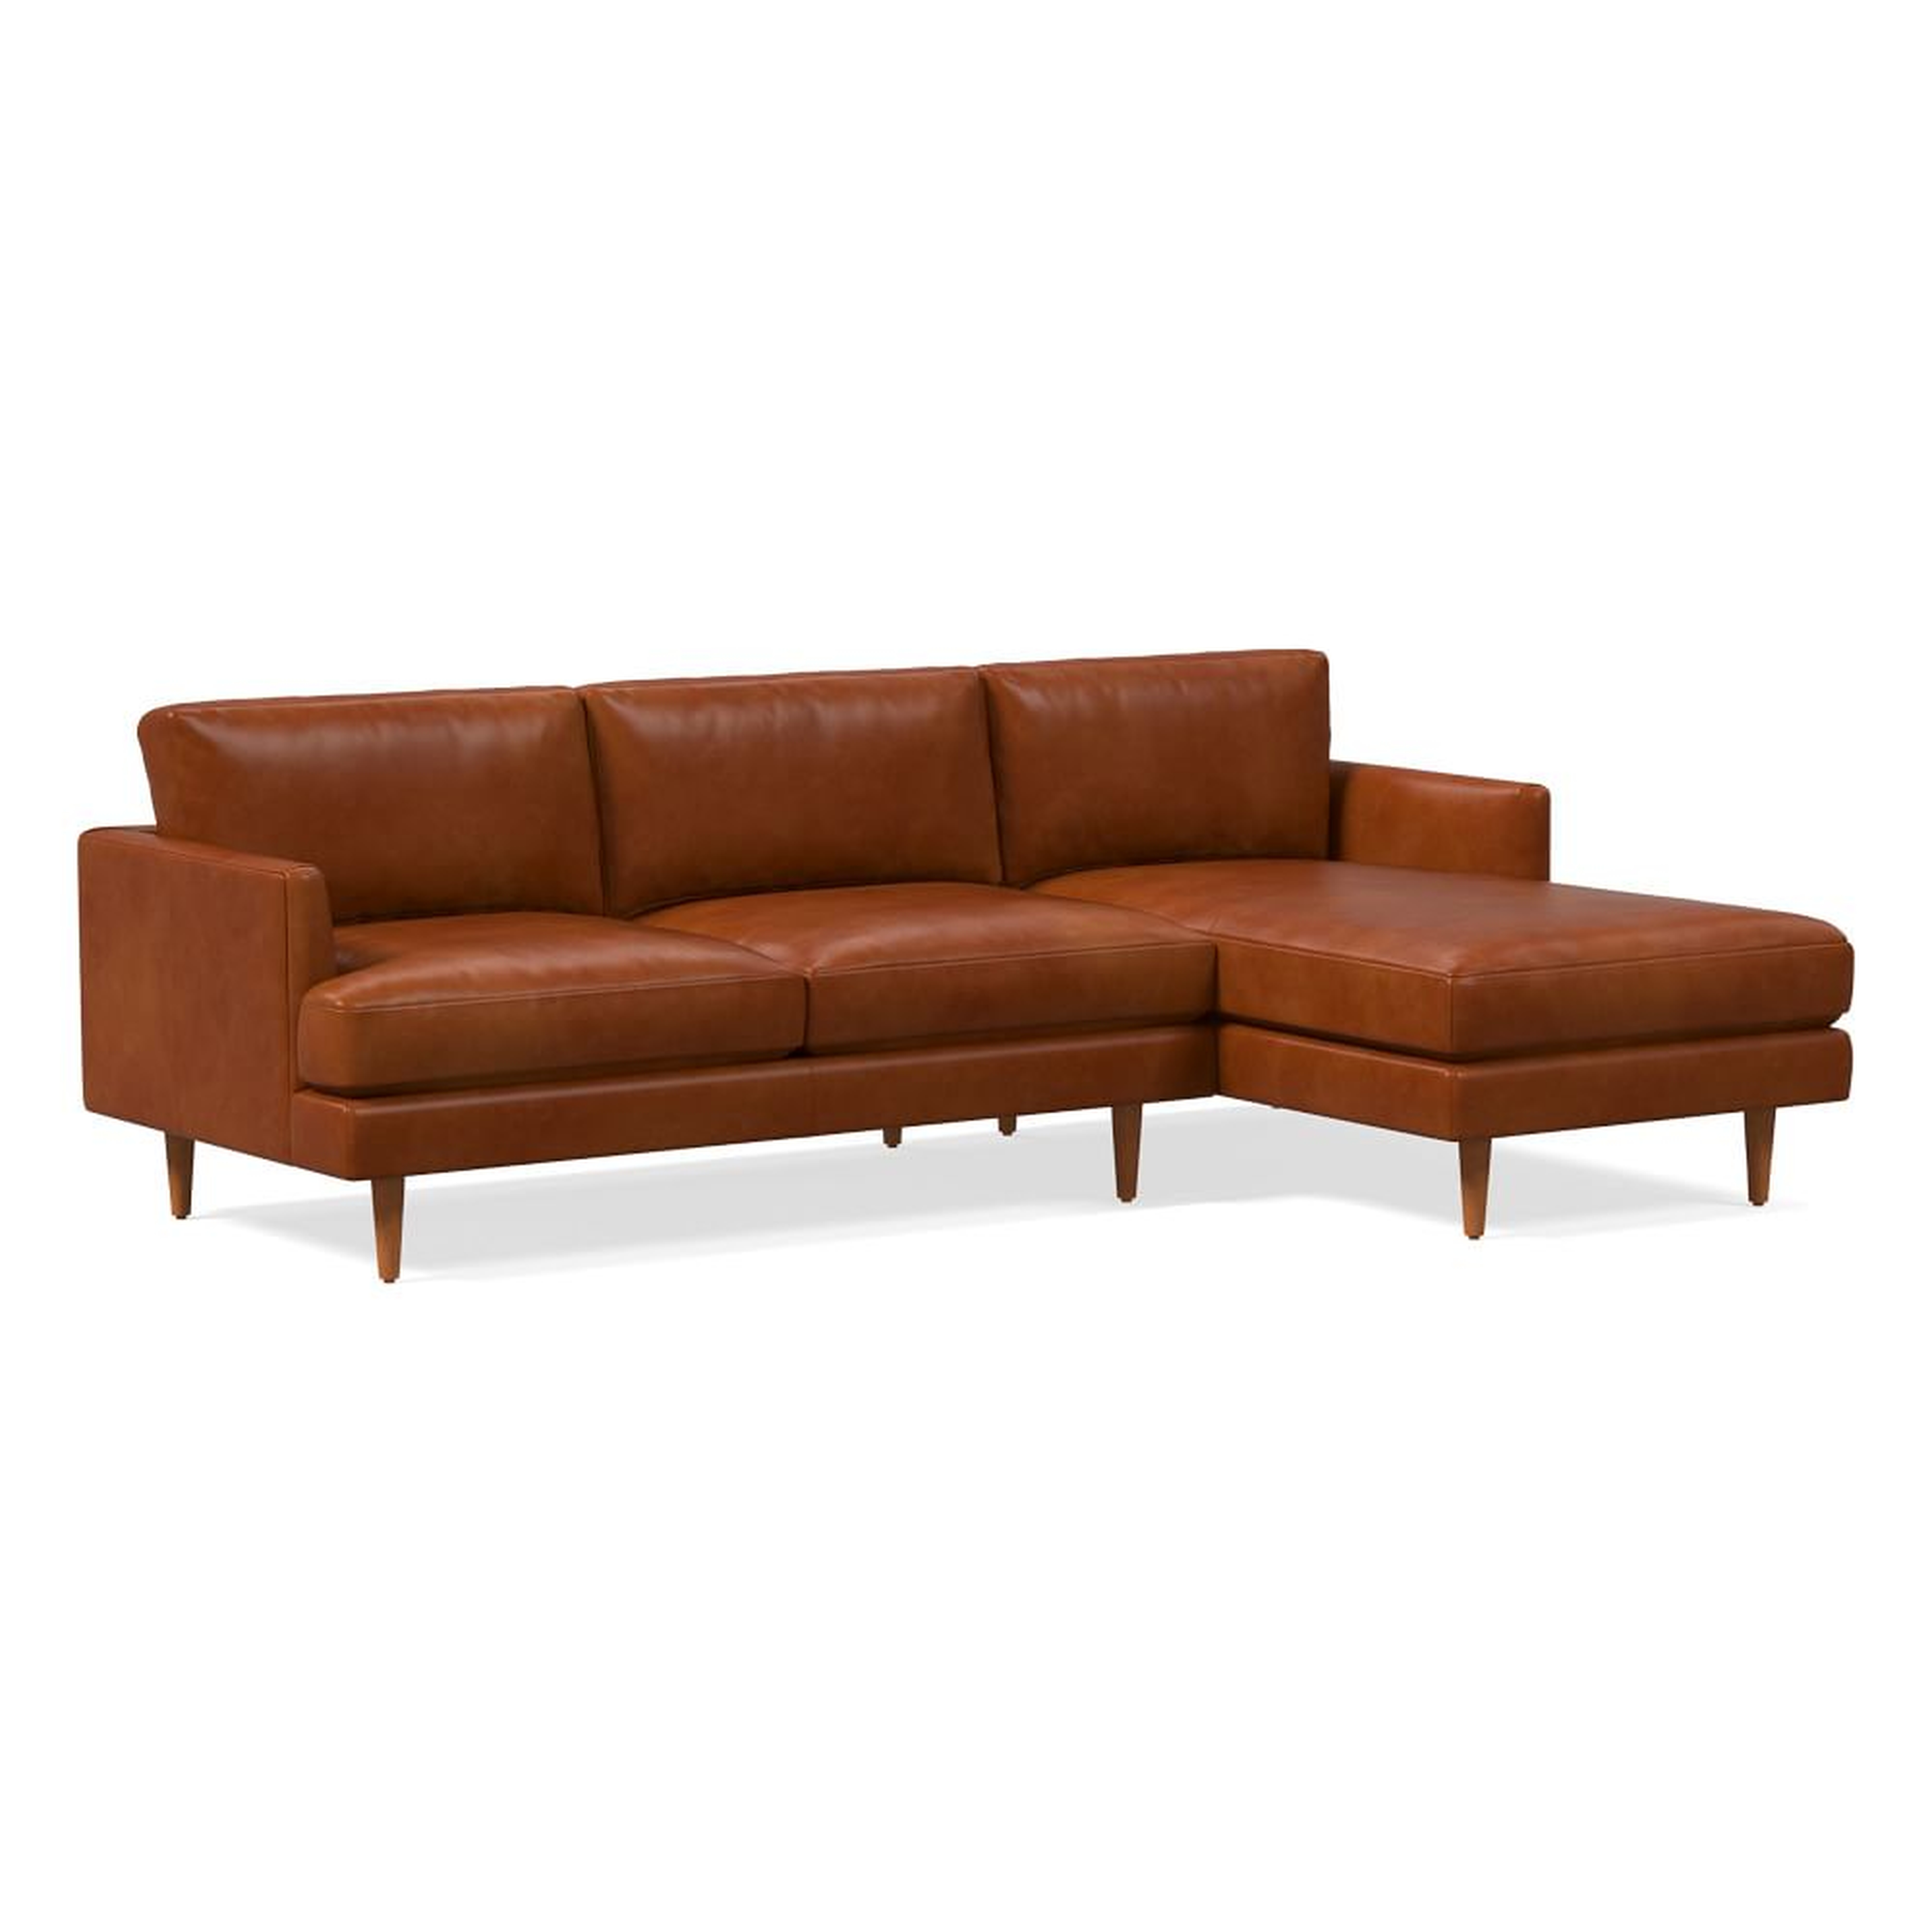 Haven Loft 99" Right 2-Piece Chaise Sectional, Saddle Leather, Nut, Pecan - West Elm